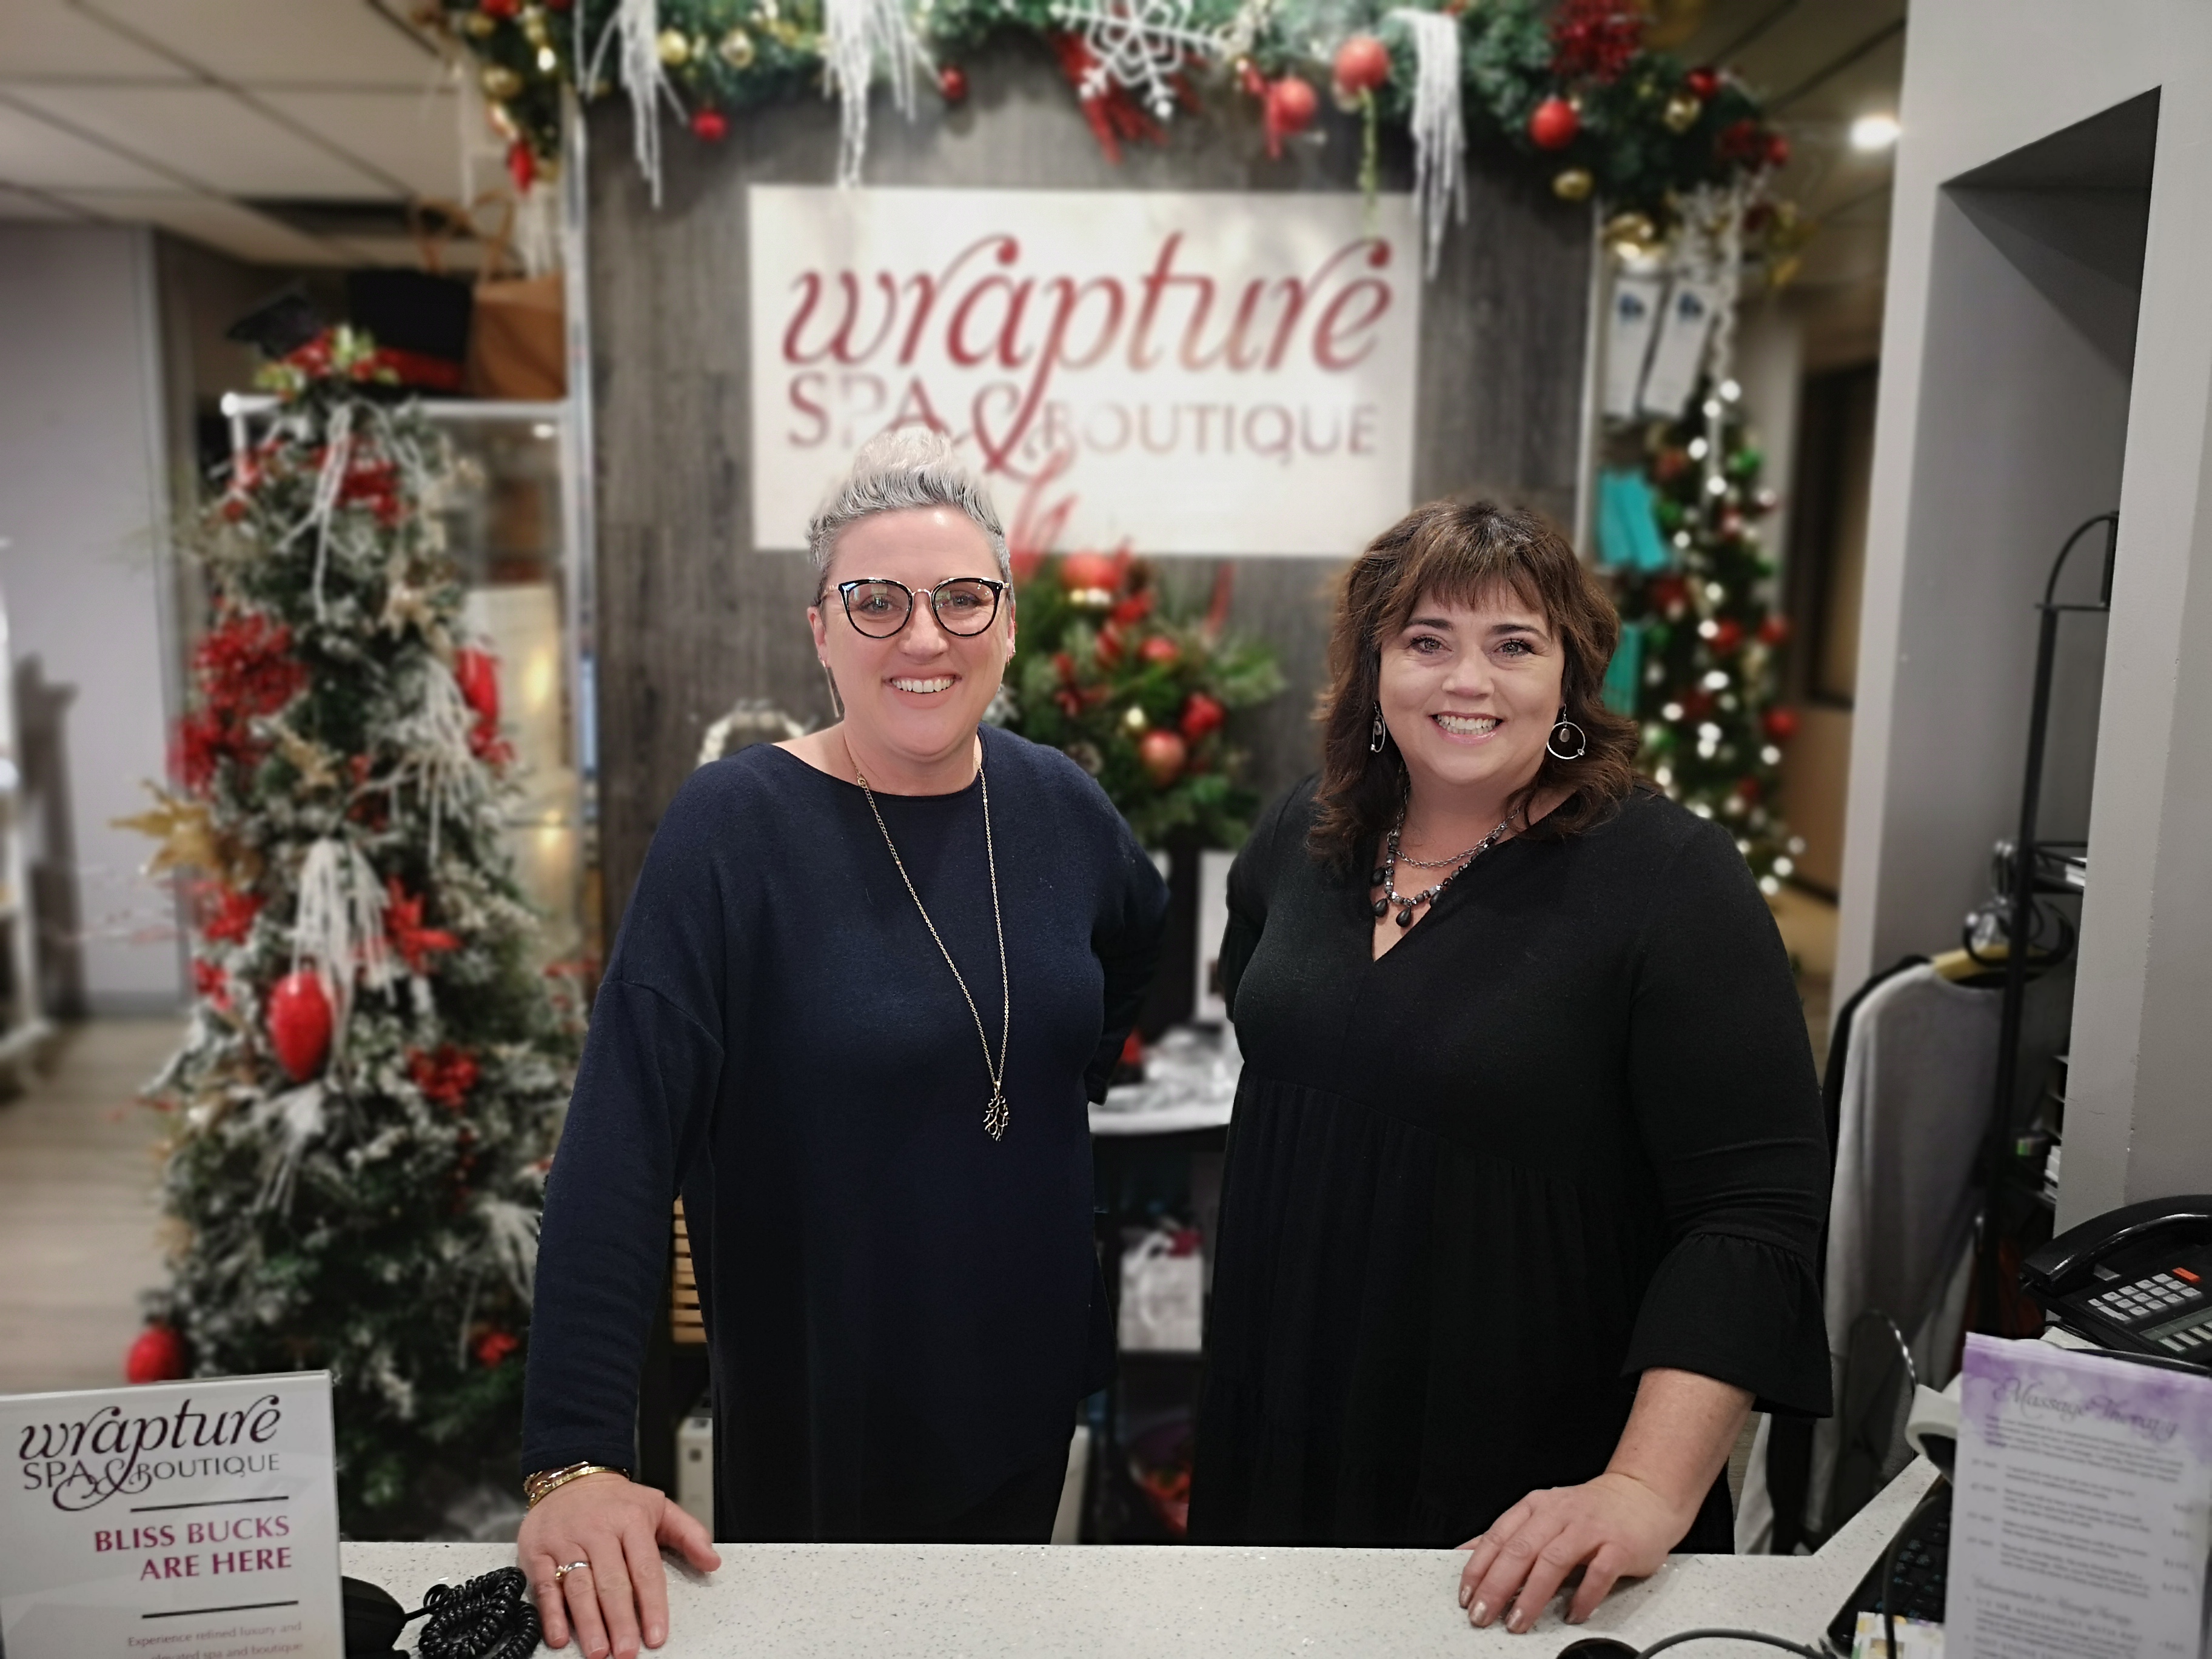 Wrapture Spa & Boutique celebrates 25 years in Moose Jaw's